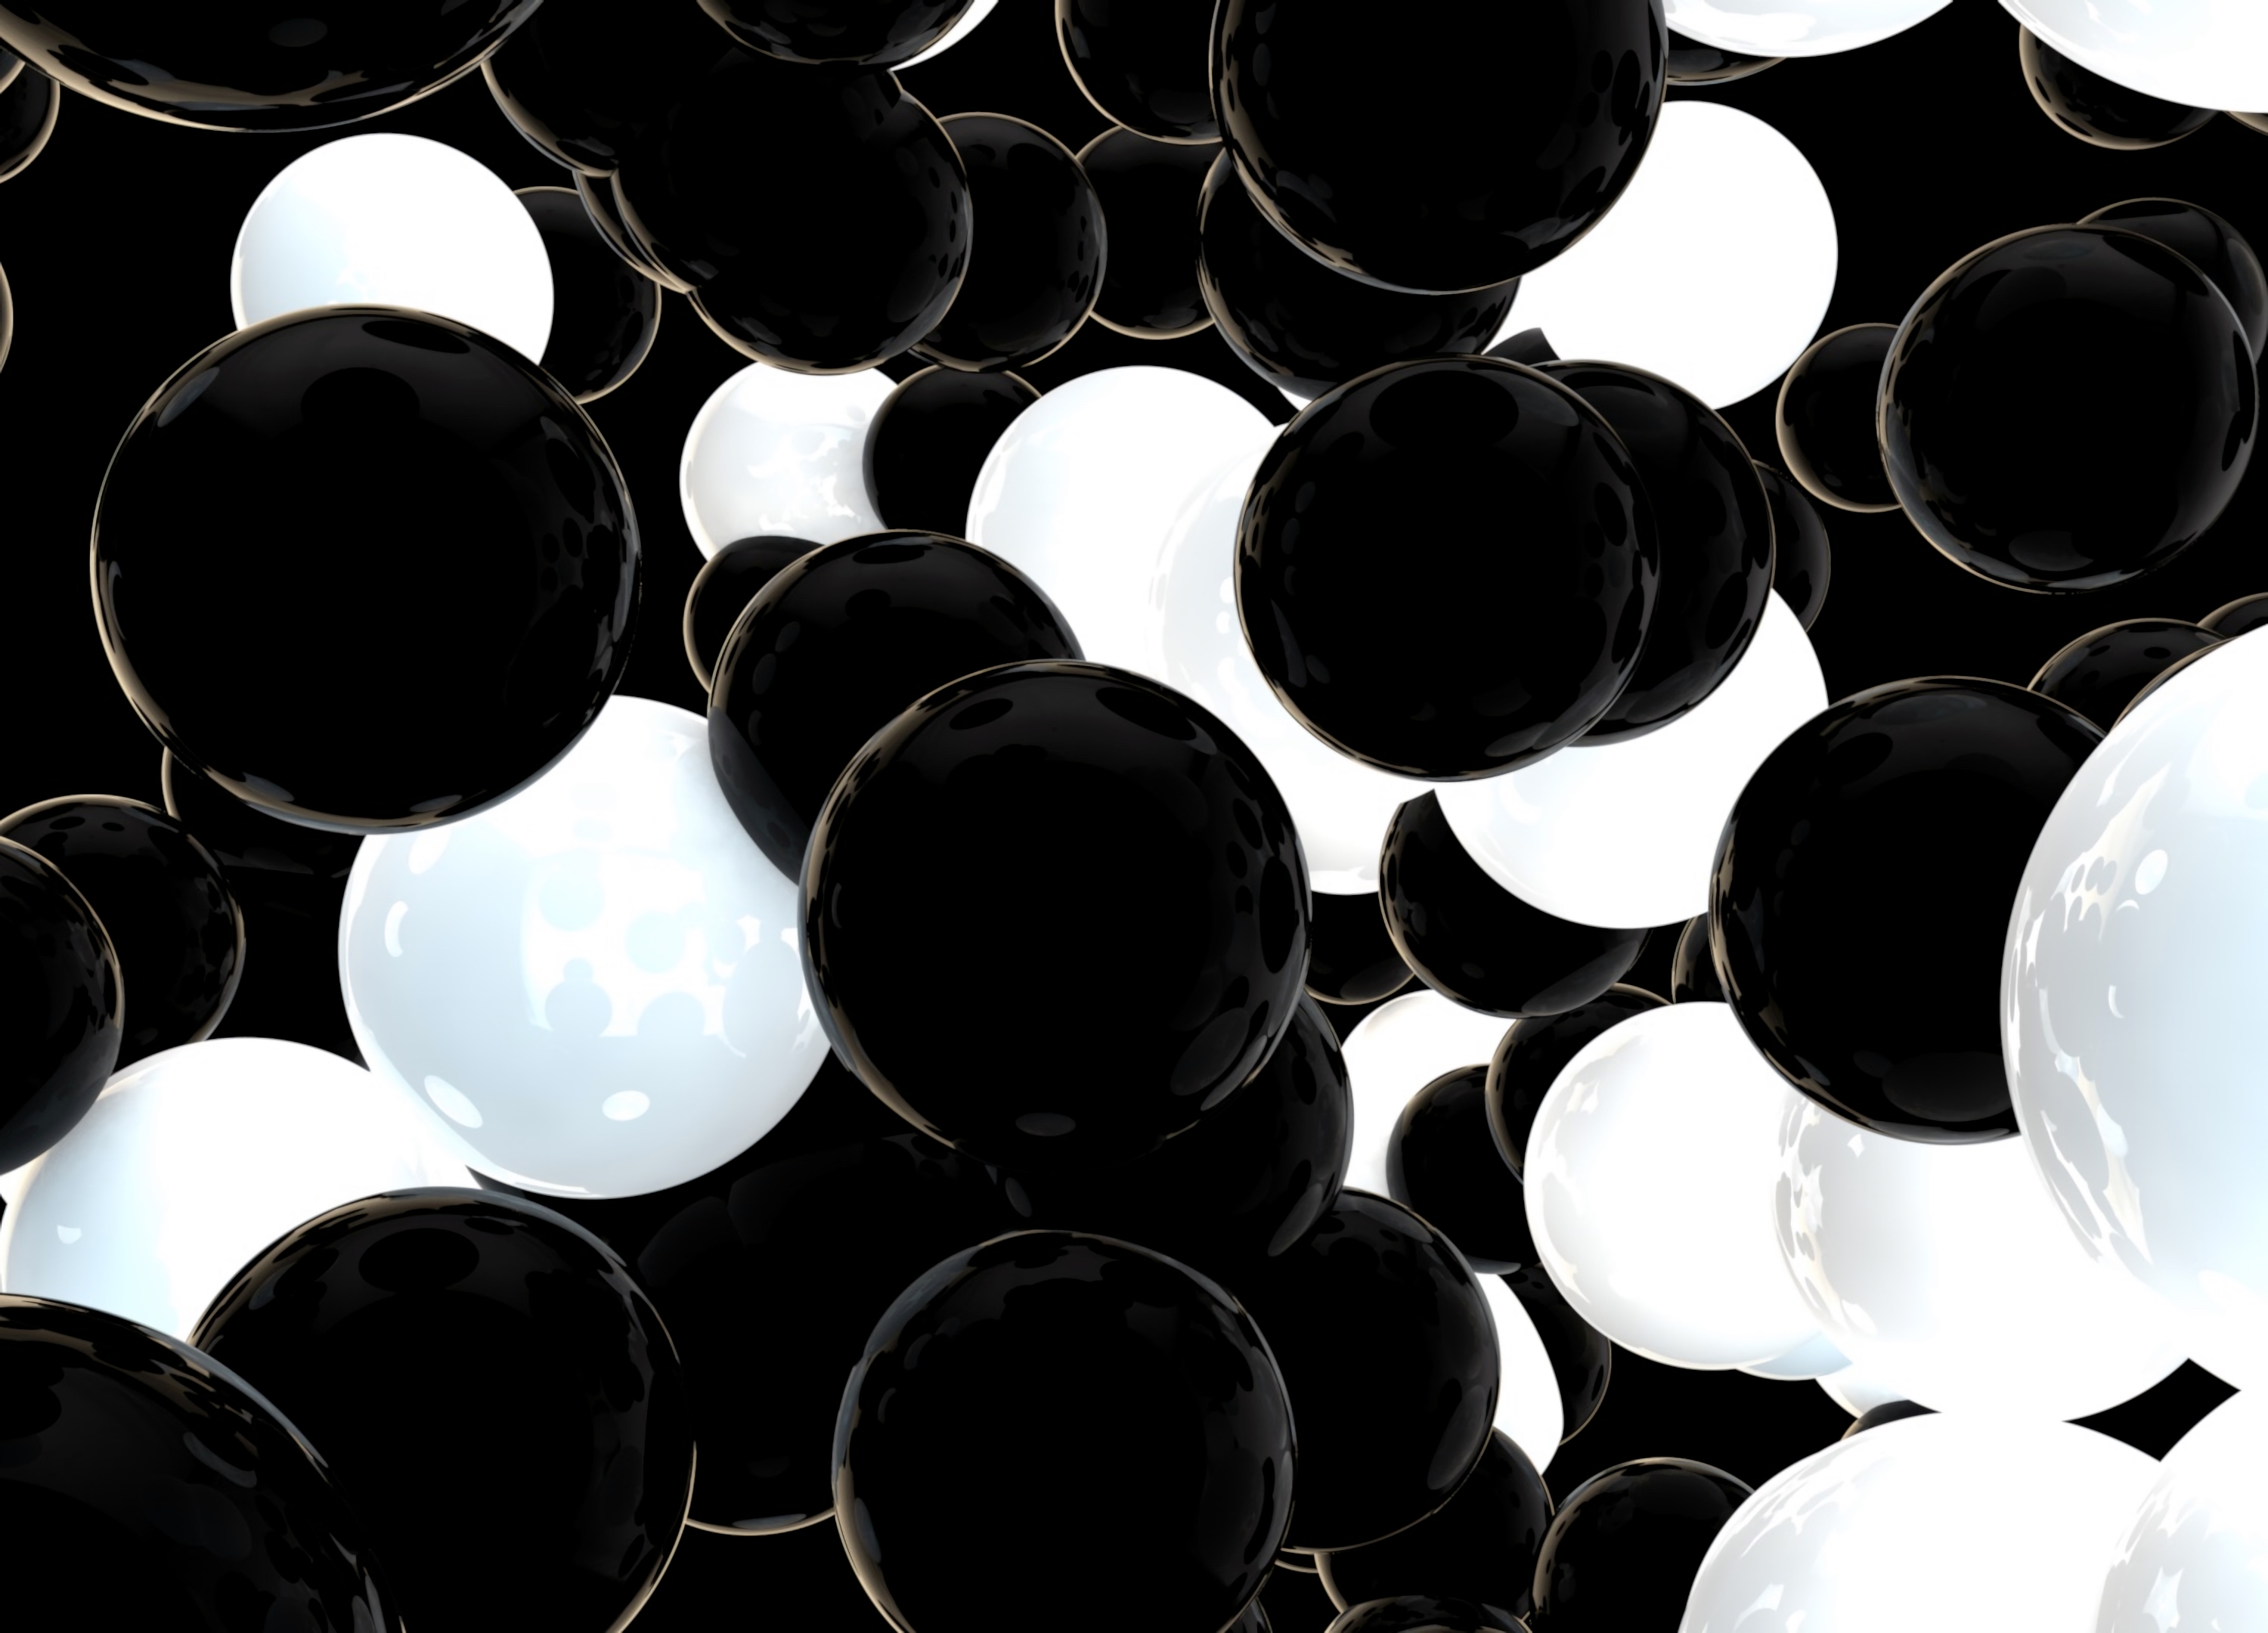 60087 download wallpaper balls, 3d, black, white, sphere, spheres screensavers and pictures for free